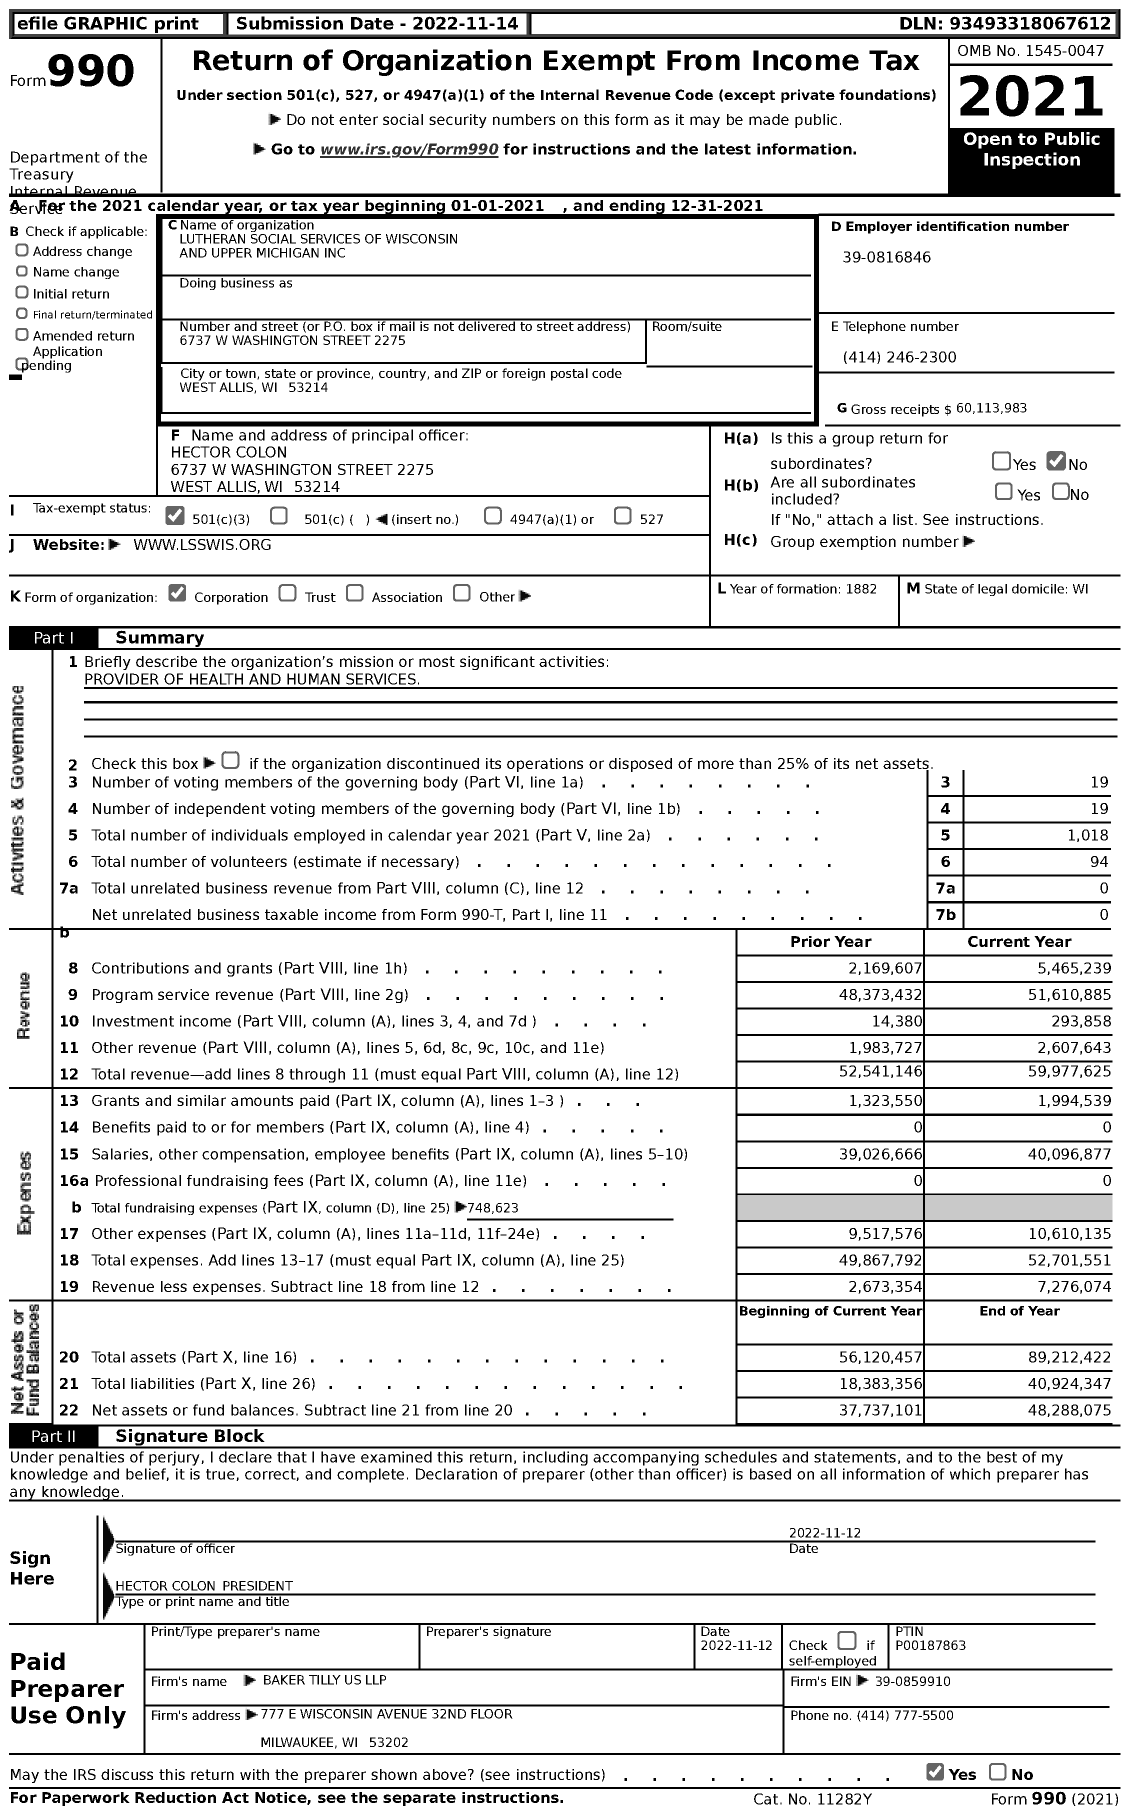 Image of first page of 2021 Form 990 for Lutheran Social Services of Wisconsin and Upper Michigan (LSS)